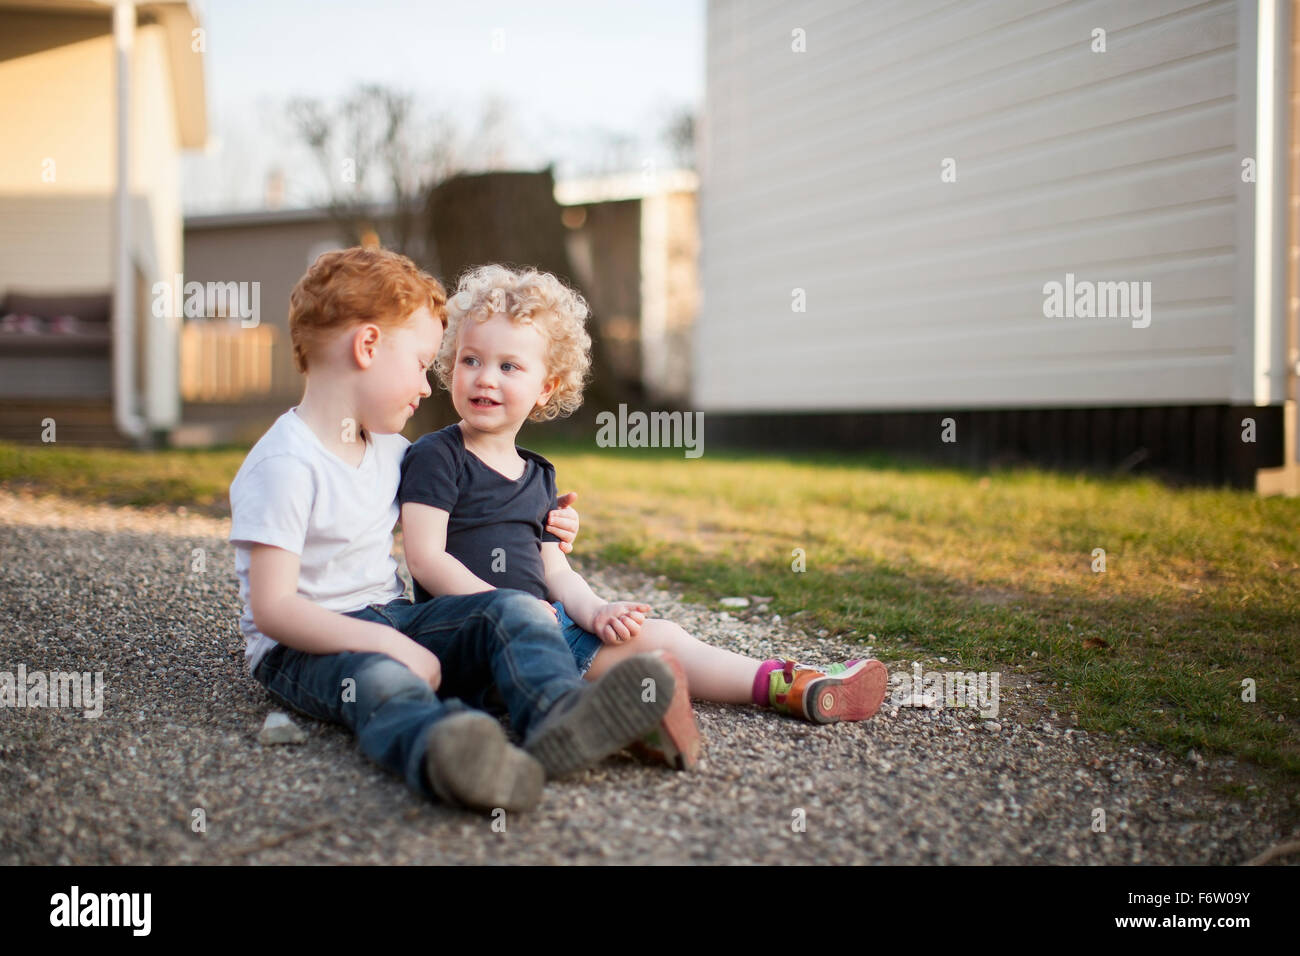 Little girl and boy sitting on gravel path Stock Photo